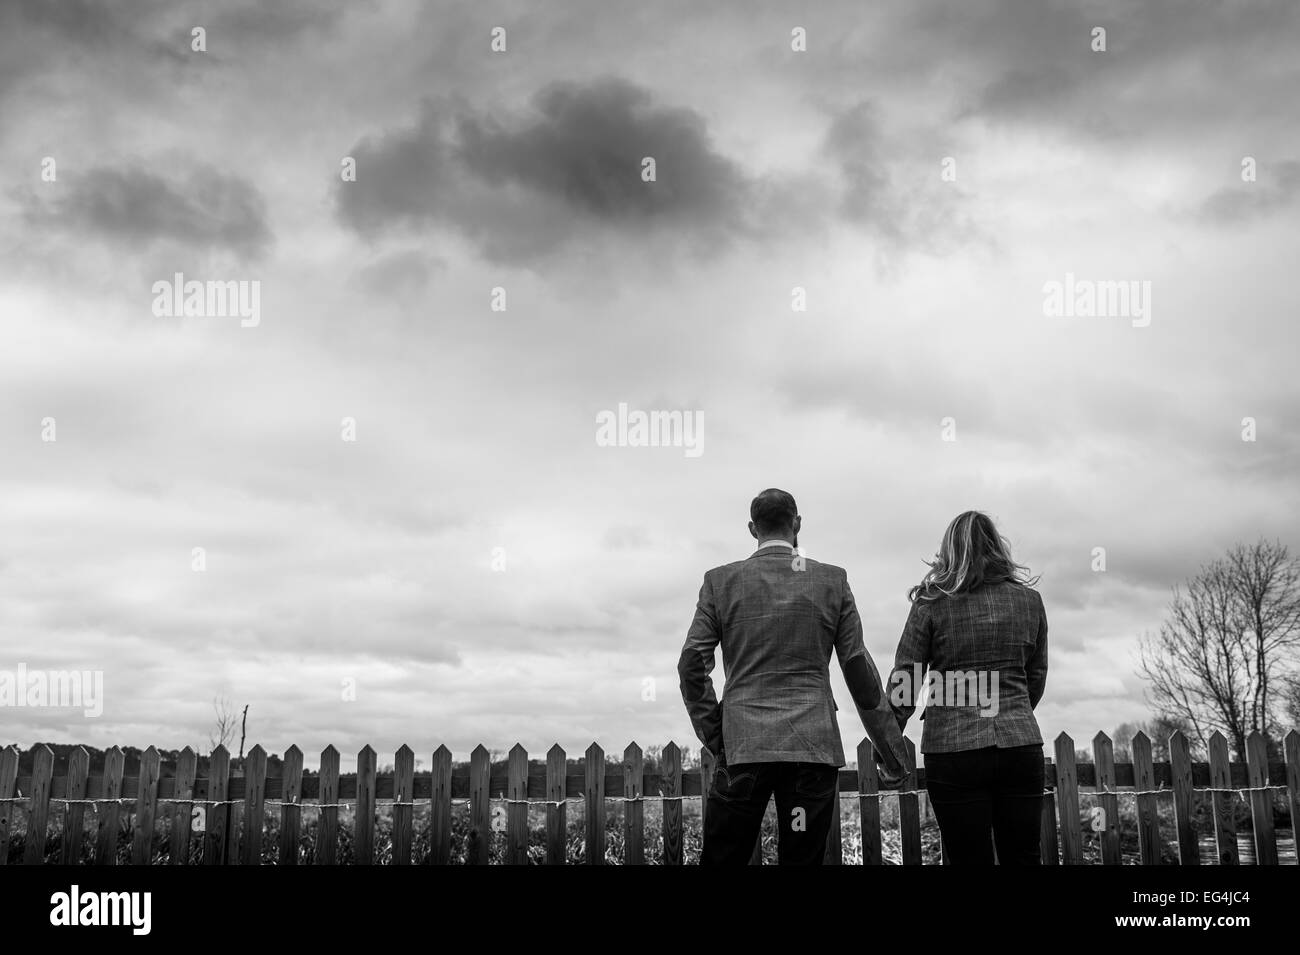 a black and white photograph of a man and woman holding hands standing against a wooden fence facing a stormy atmospheric sky Stock Photo